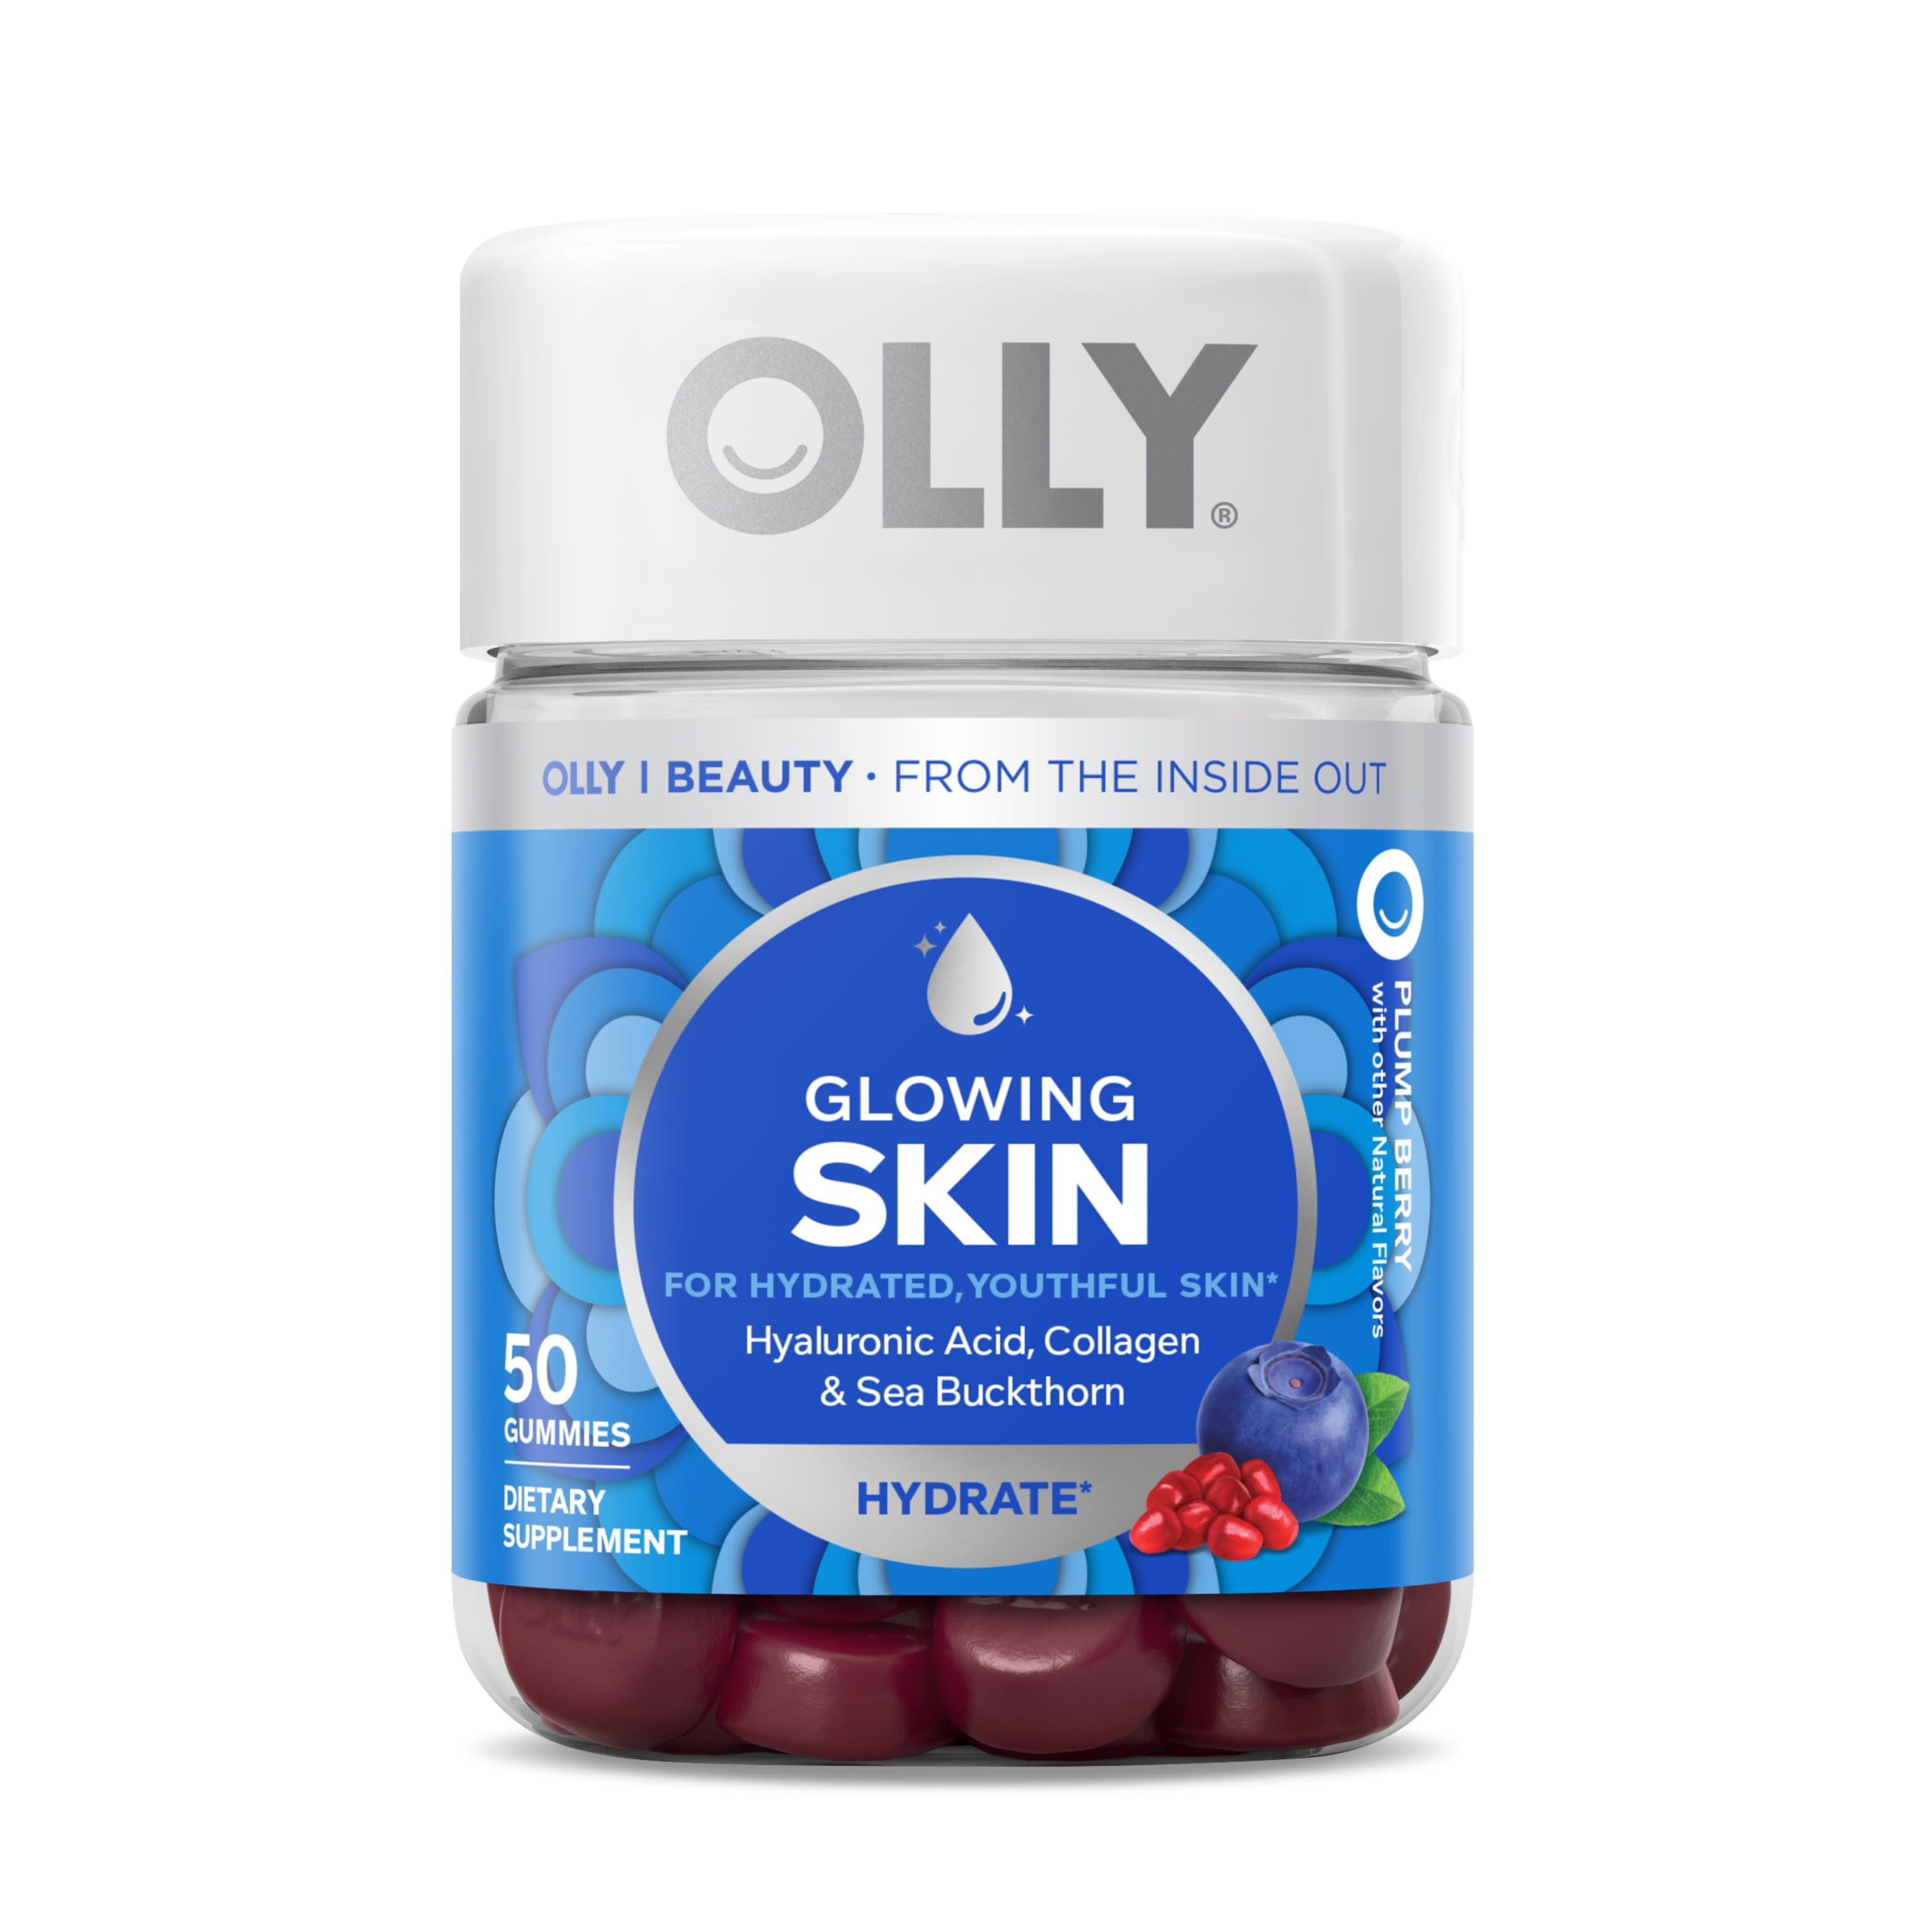 OLLY Glowing Skin Vitamin Gummy, Hyaluronic Acid, Plump Berry, 50 Ct